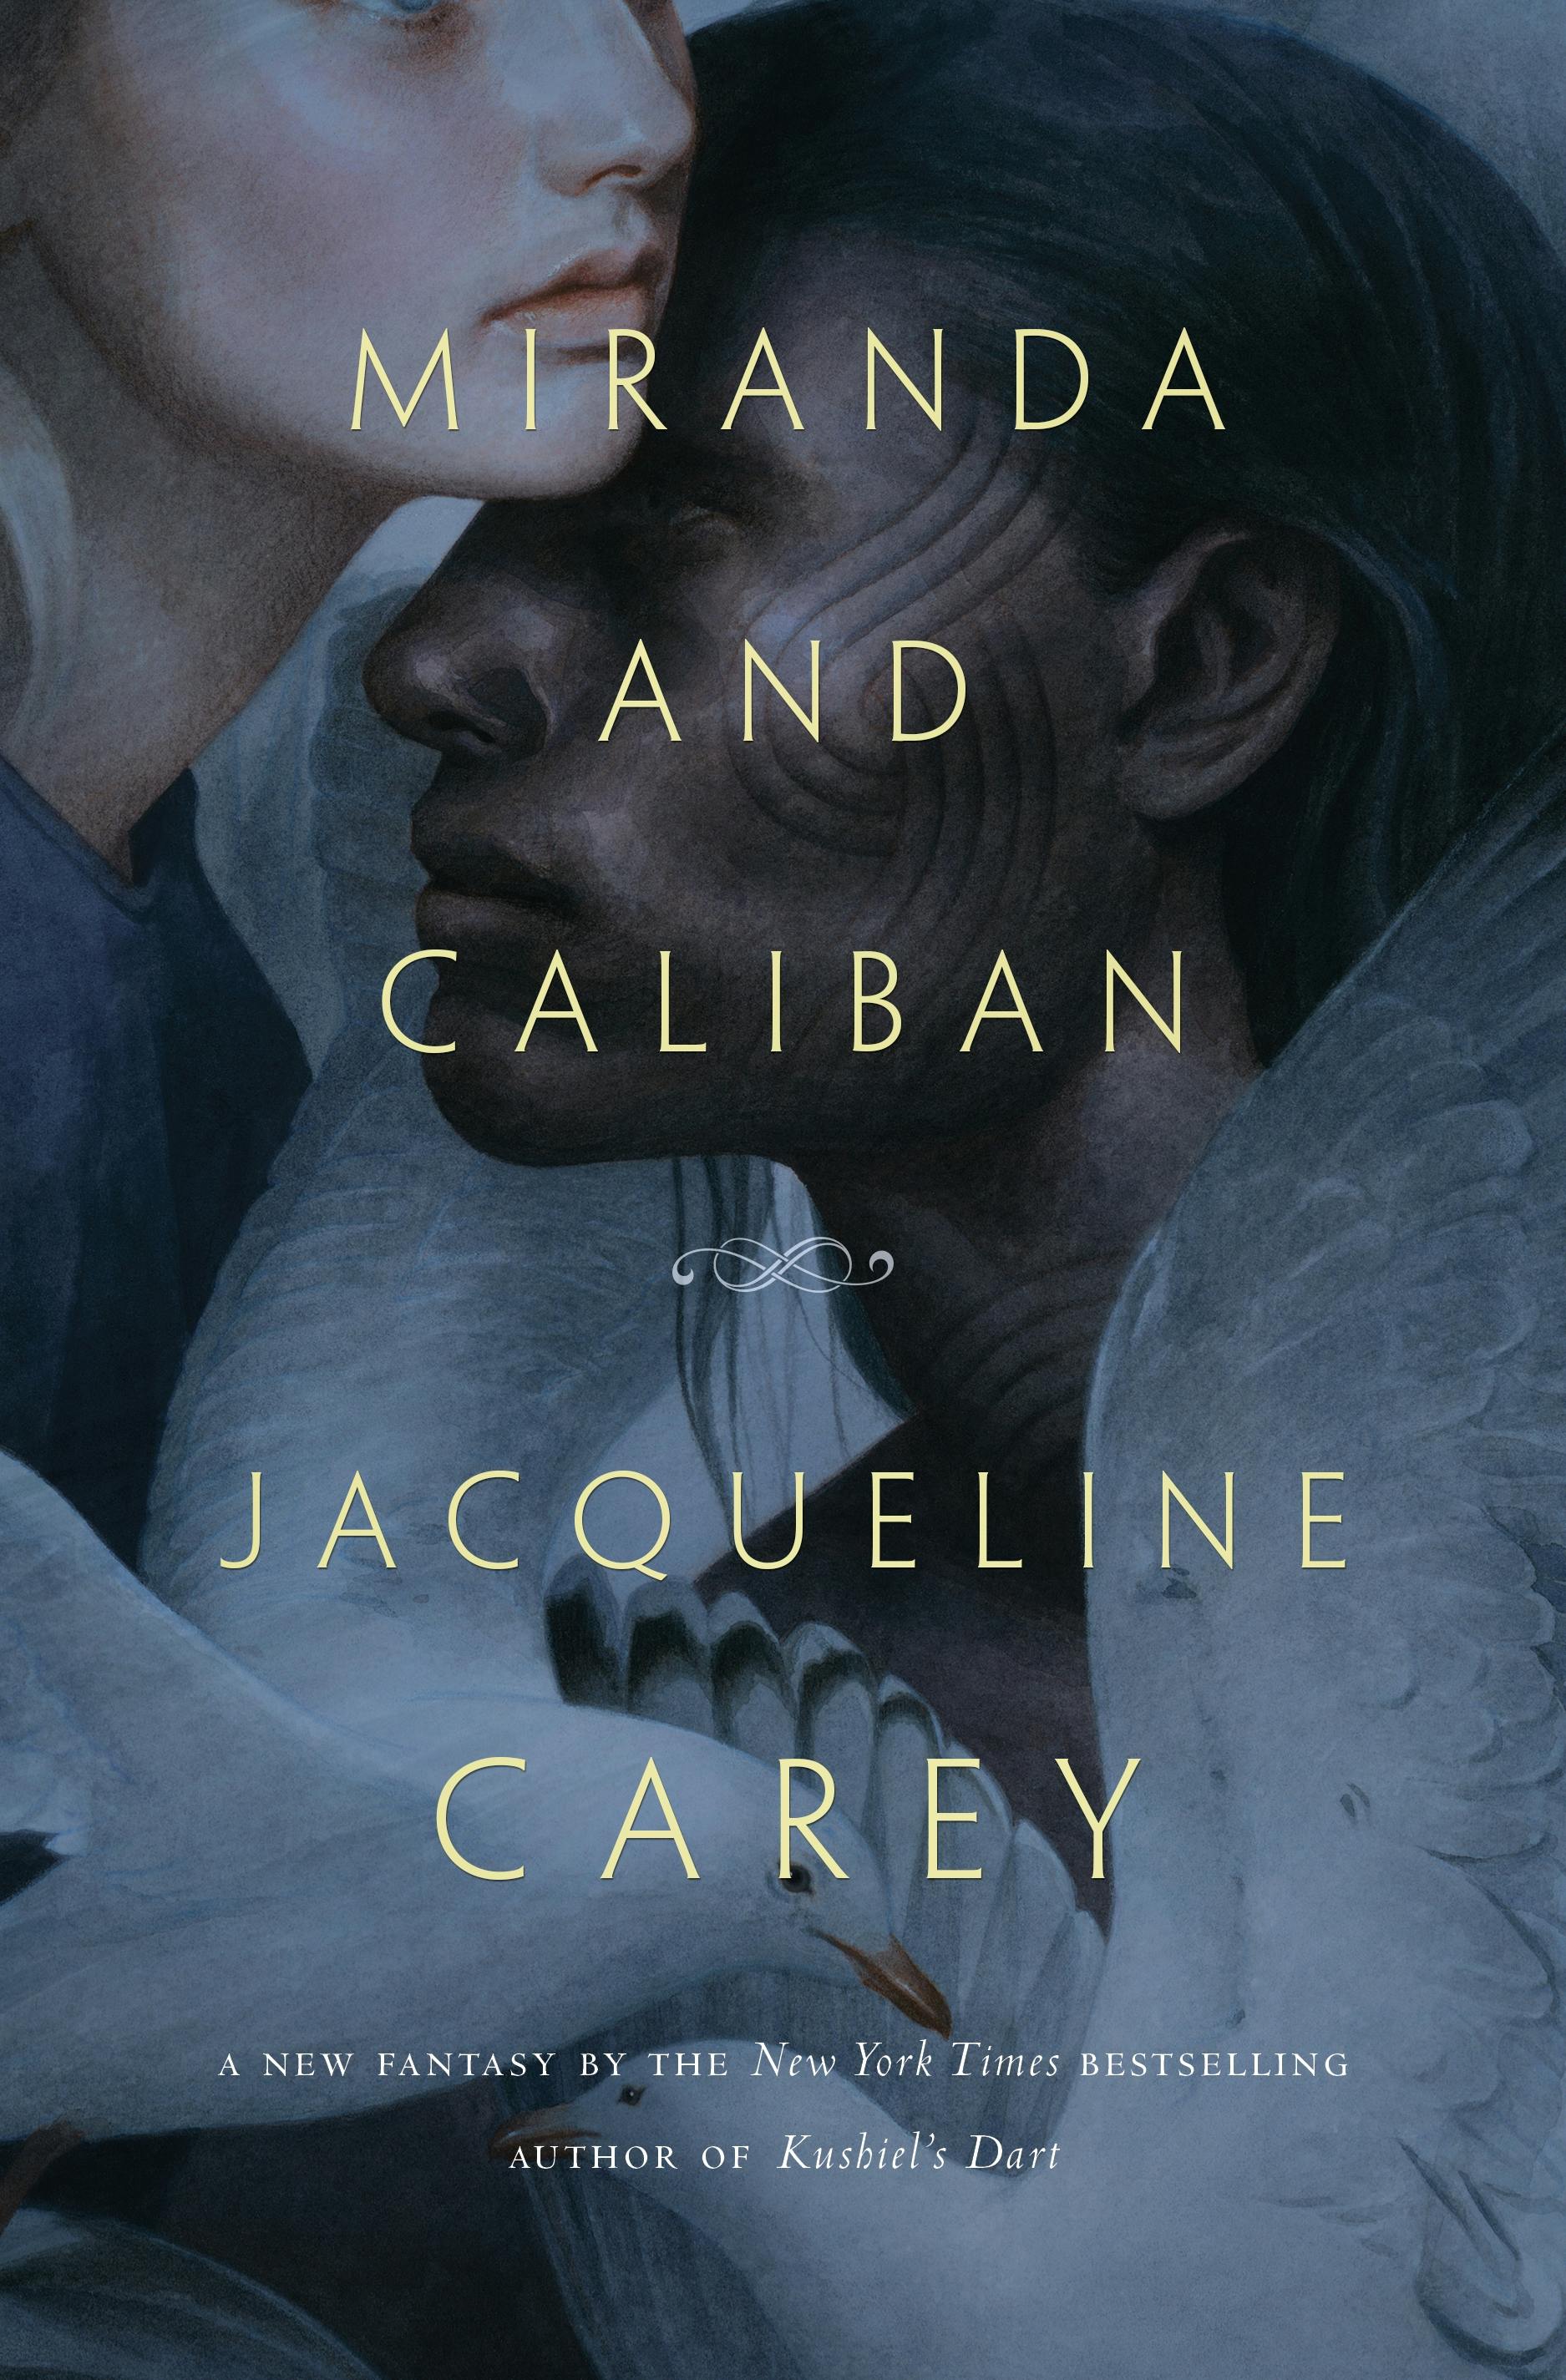 Cover for the book titled as: Miranda and Caliban